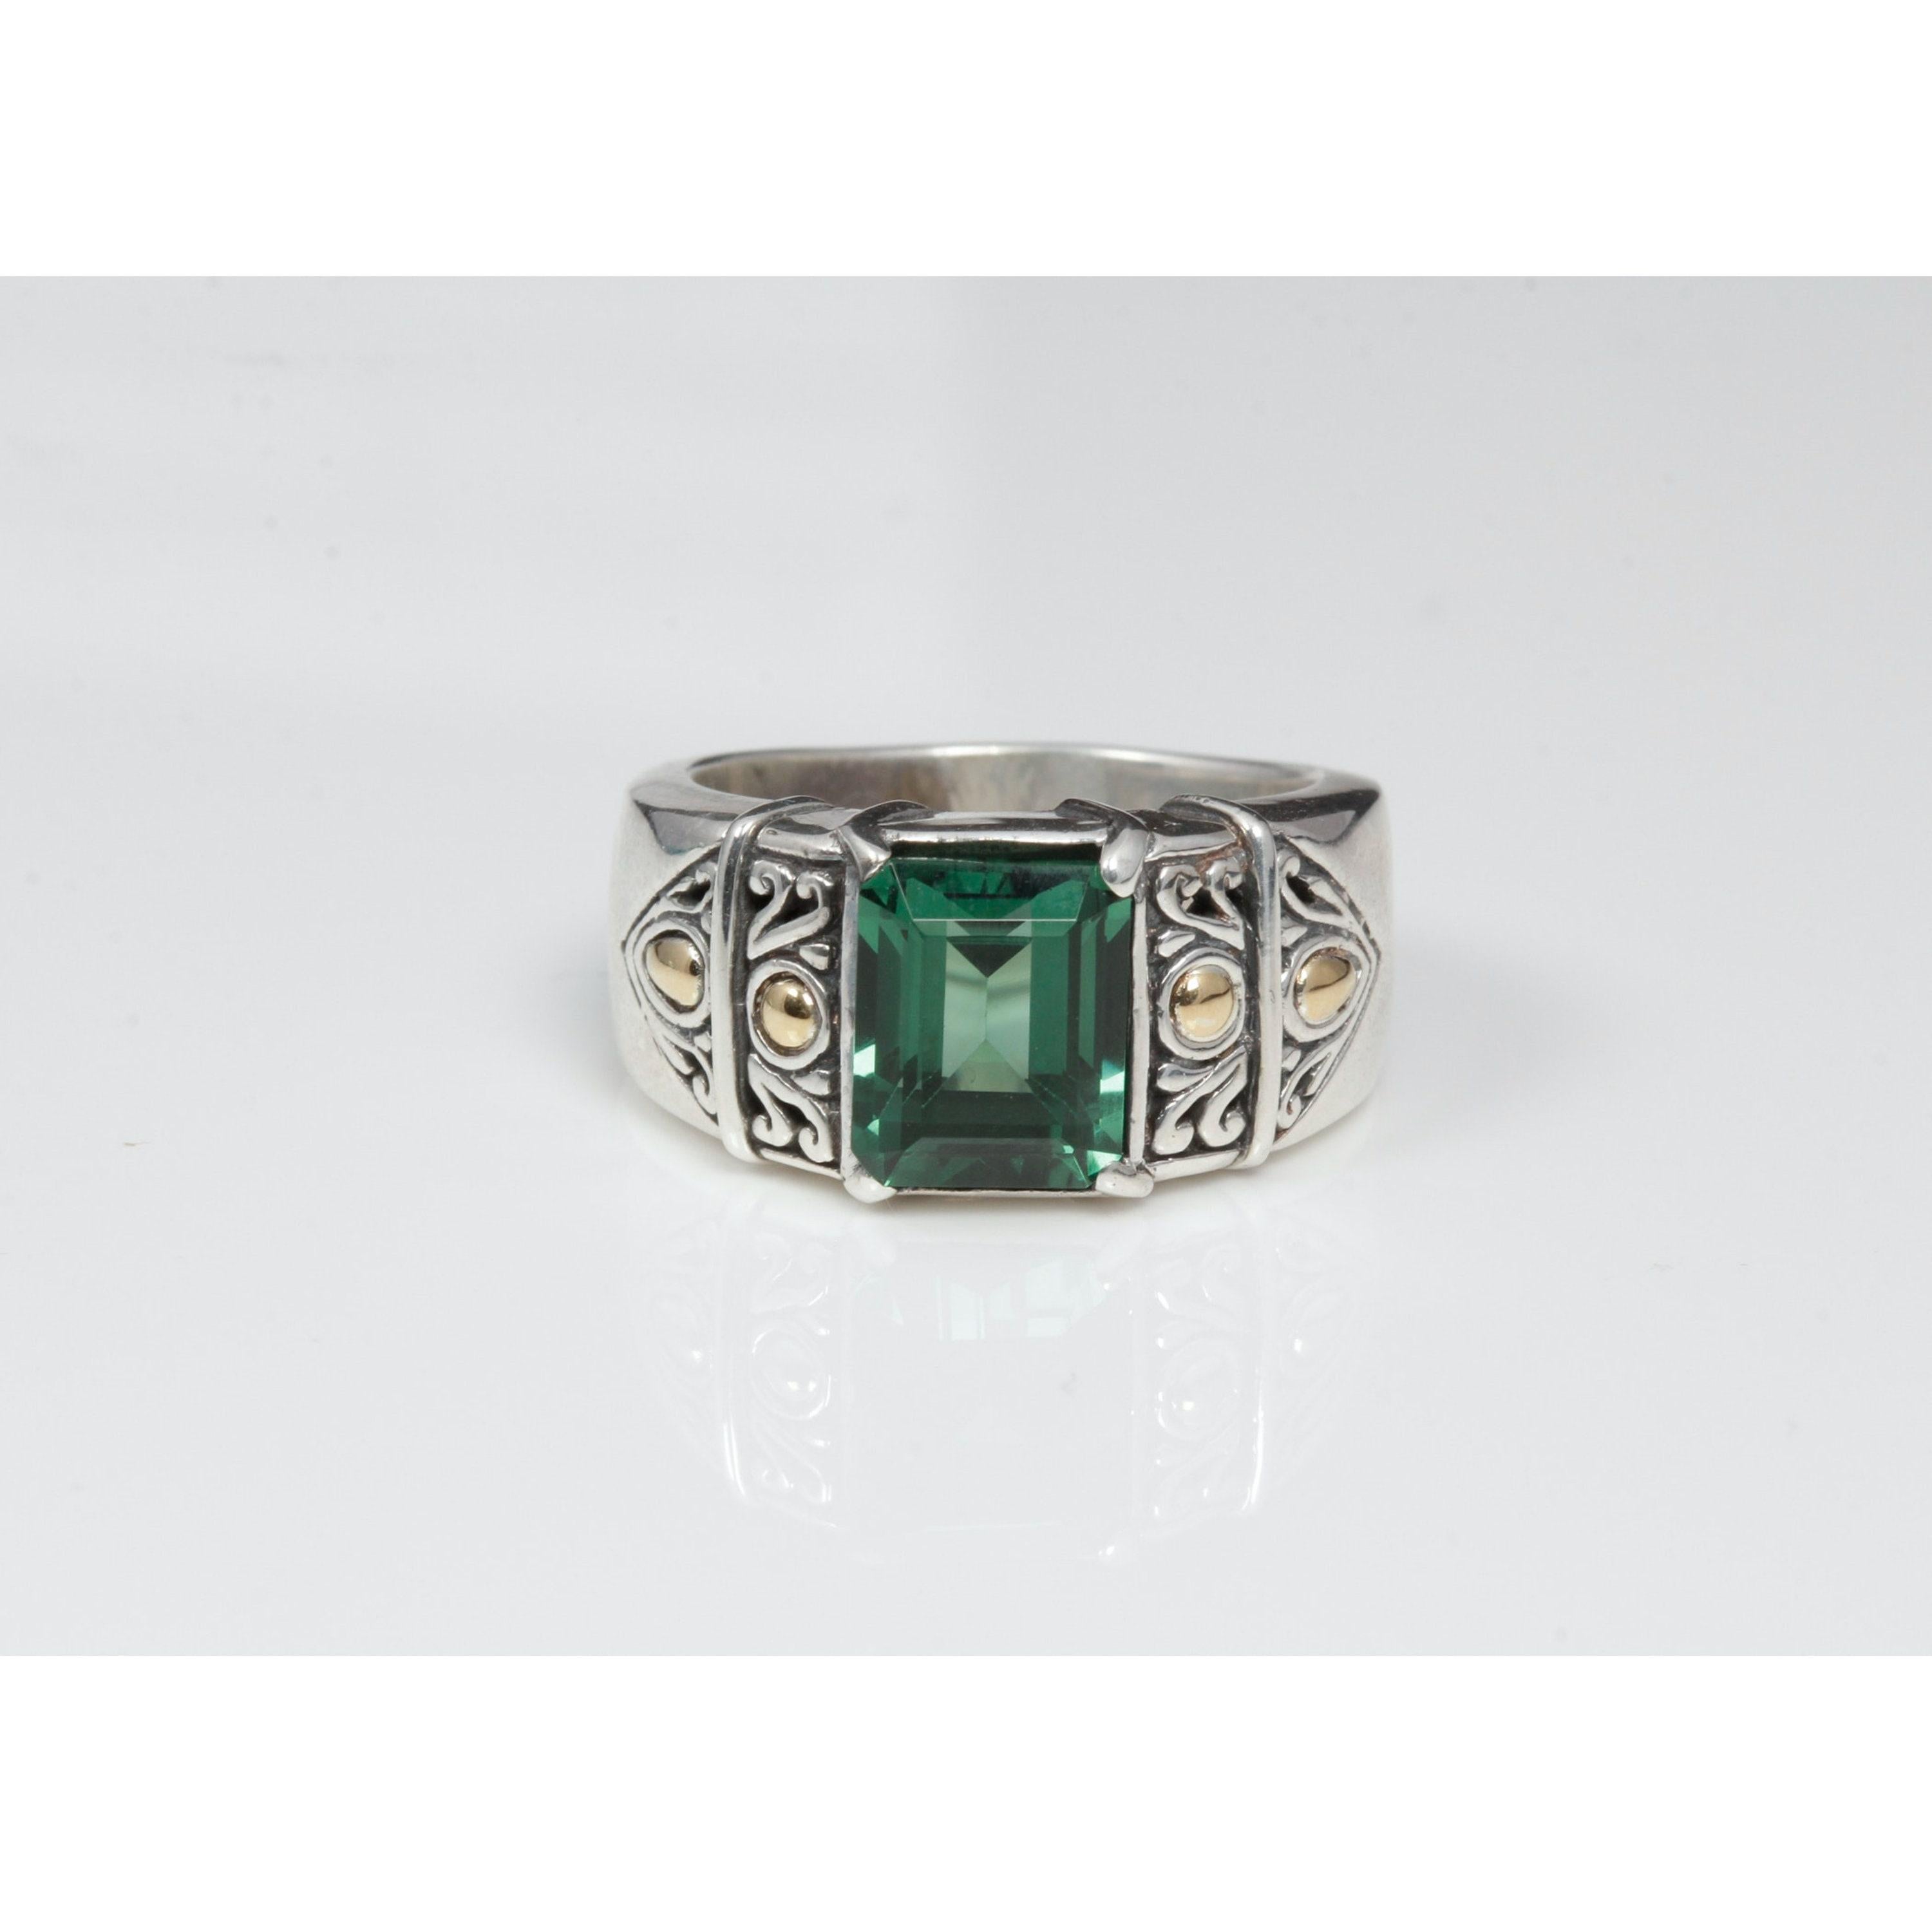 For Sale:  3 Carat Vintage Zambian Emerald Engagement Ring, Art Deco Emerald Cocktail Ring 5